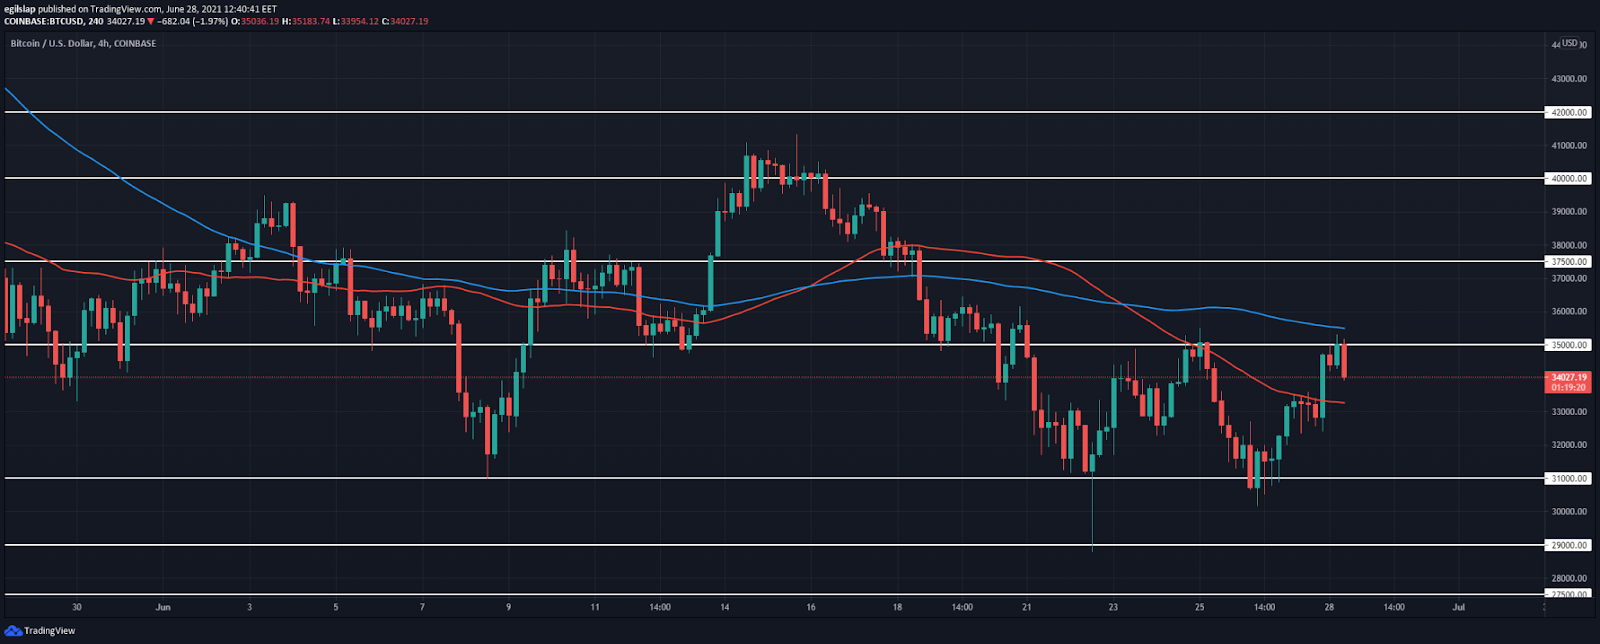 Bitcoin price analysis: Bitcoin retests $35,000 overnight, another move lower incoming? 2